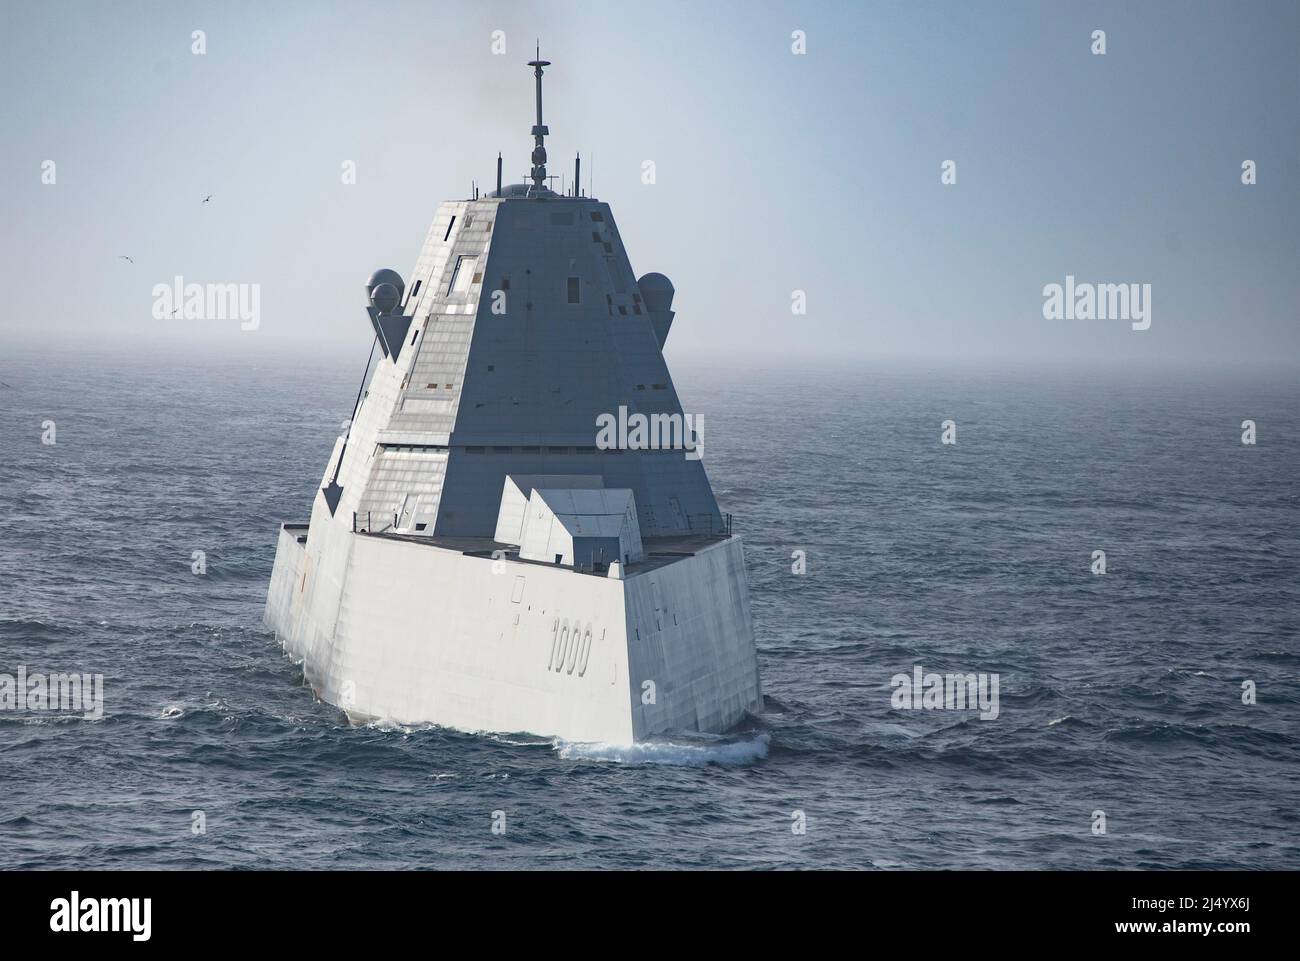 Pacific Ocean, United States. 11 April, 2022. The U.S. Navy Zumwalt-class guided-missile destroyer USS Zumwalt underway conducting routine operations April 11, 2022 in the Pacific Ocean.  Credit: MC1 Peter Burghar/Planetpix/Alamy Live News Stock Photo